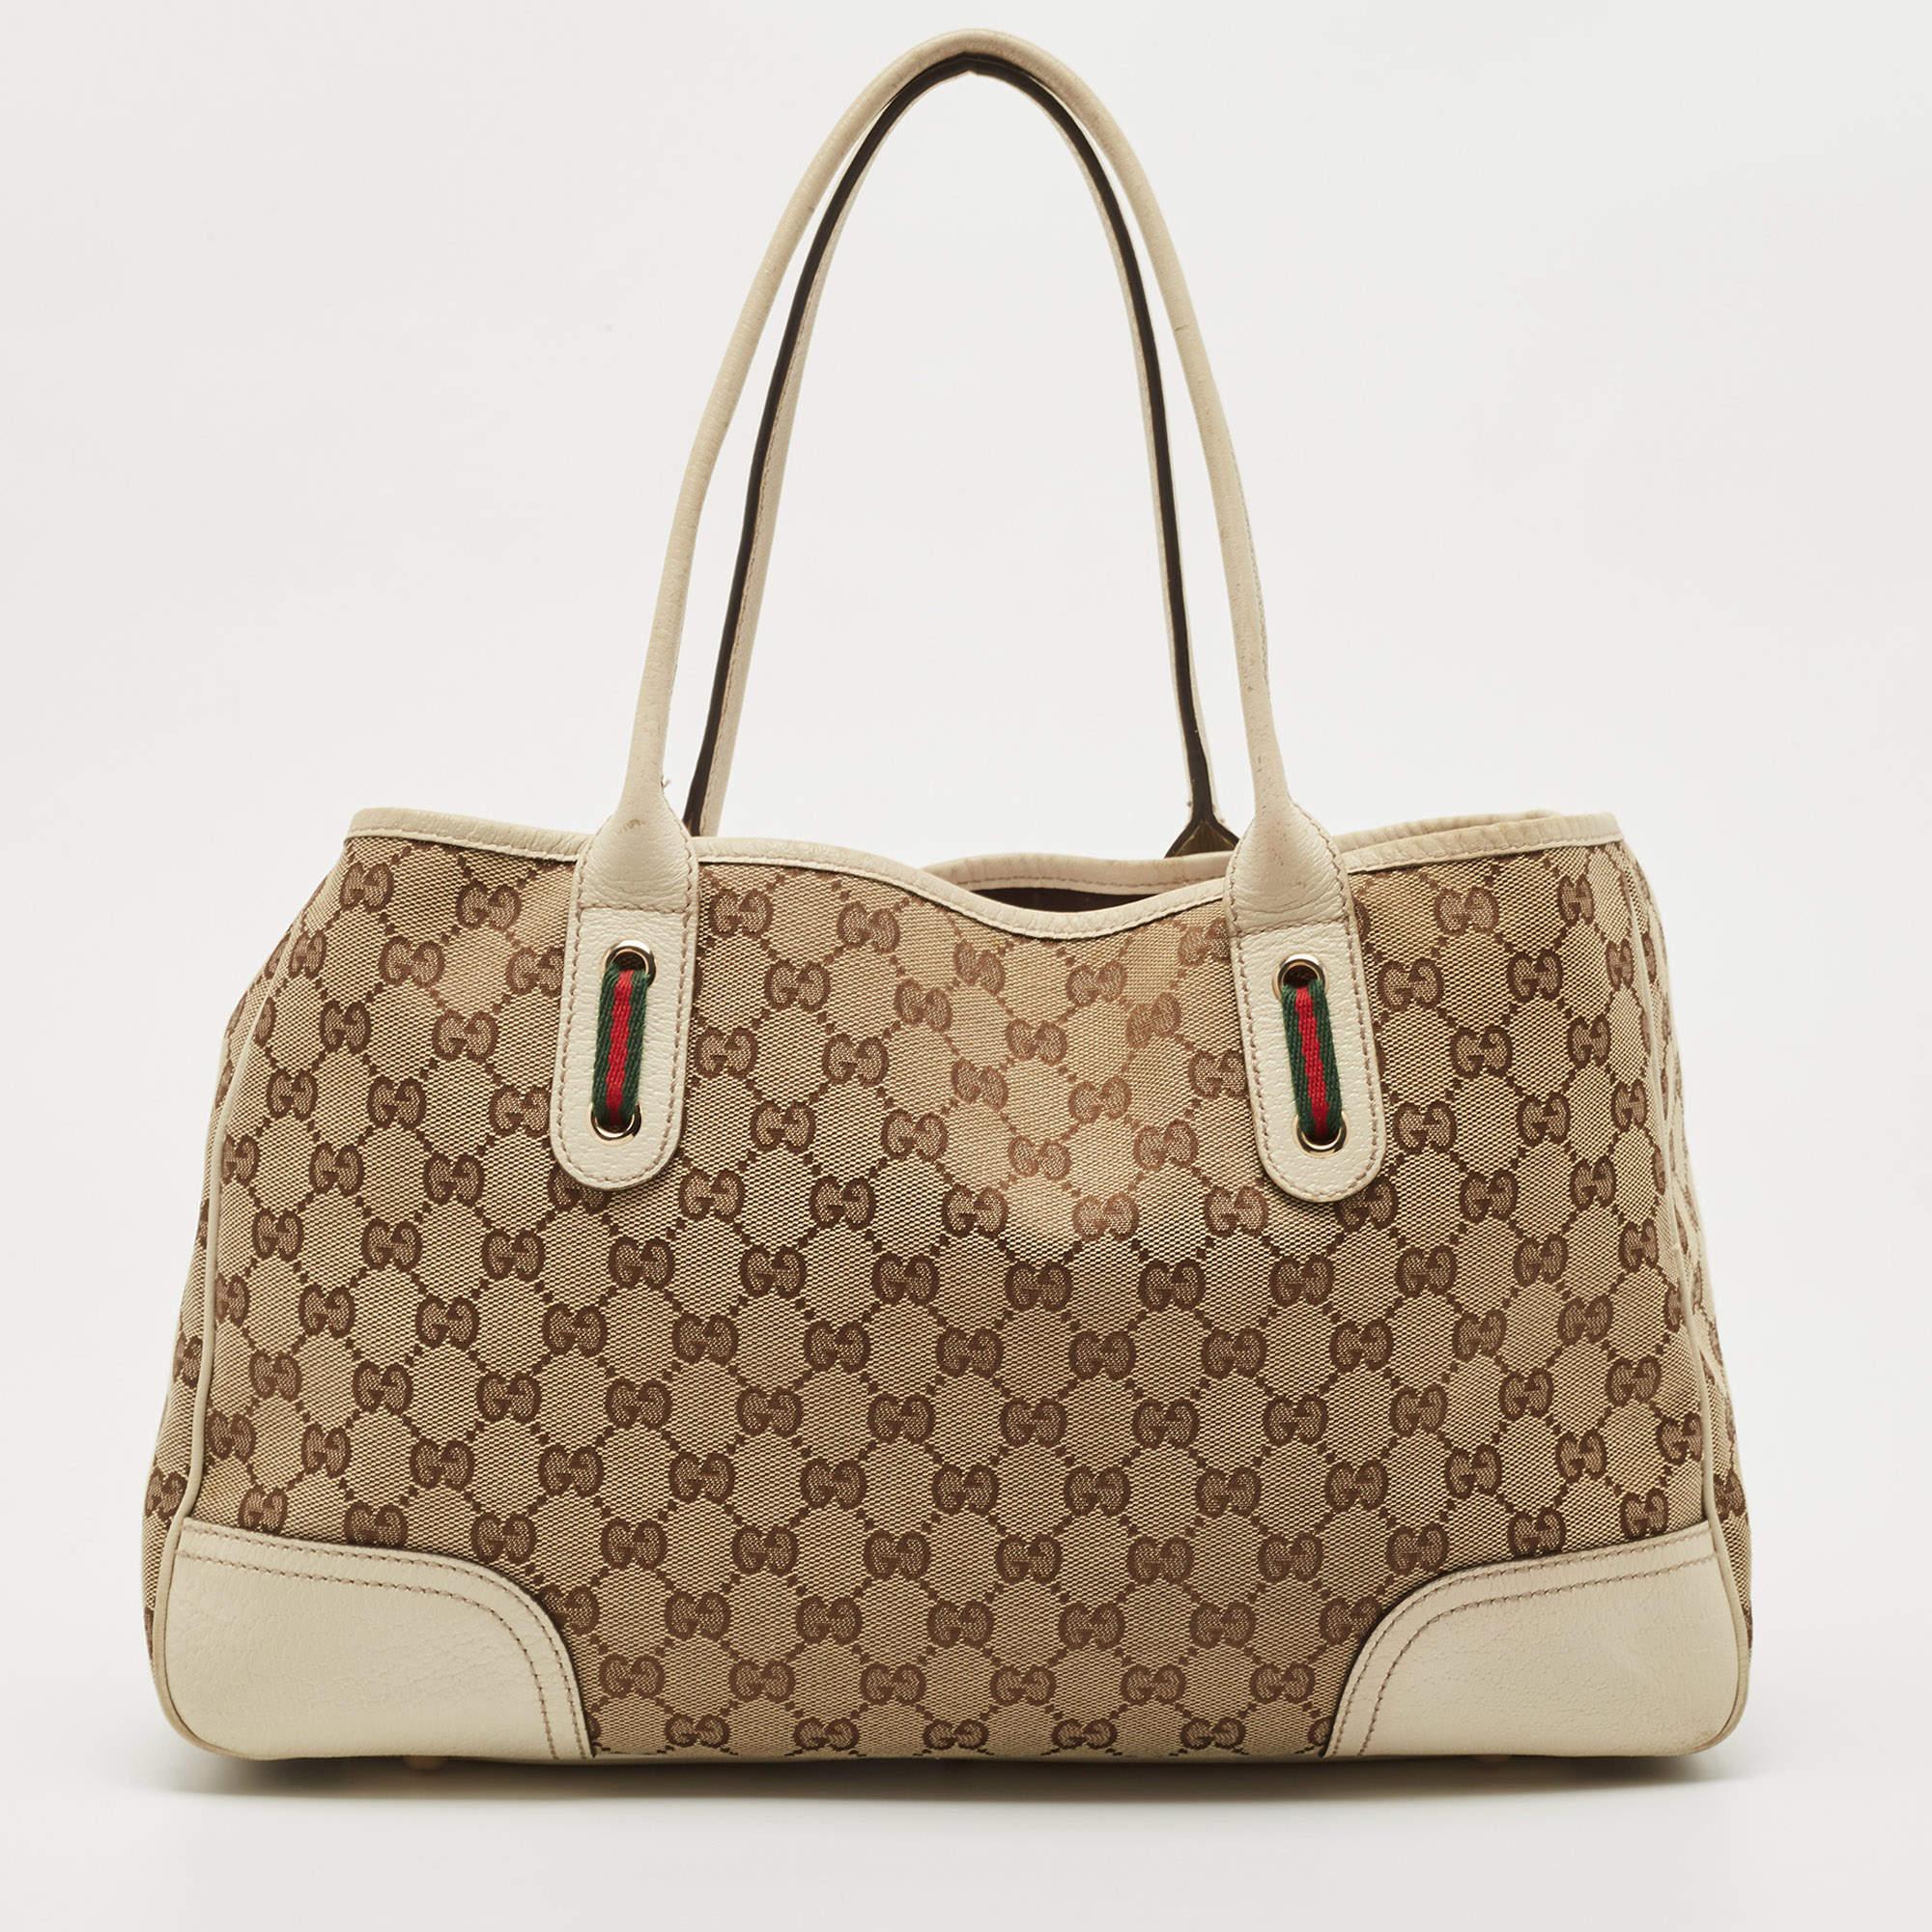 Renowned for its exclusive craftsmanship, this Gucci Princy tote will live up to your expectations. A splendid complement to your dress will be this popular bag in beige and white. This sleek and spacious GG coated canvas bag is luxurious enough to